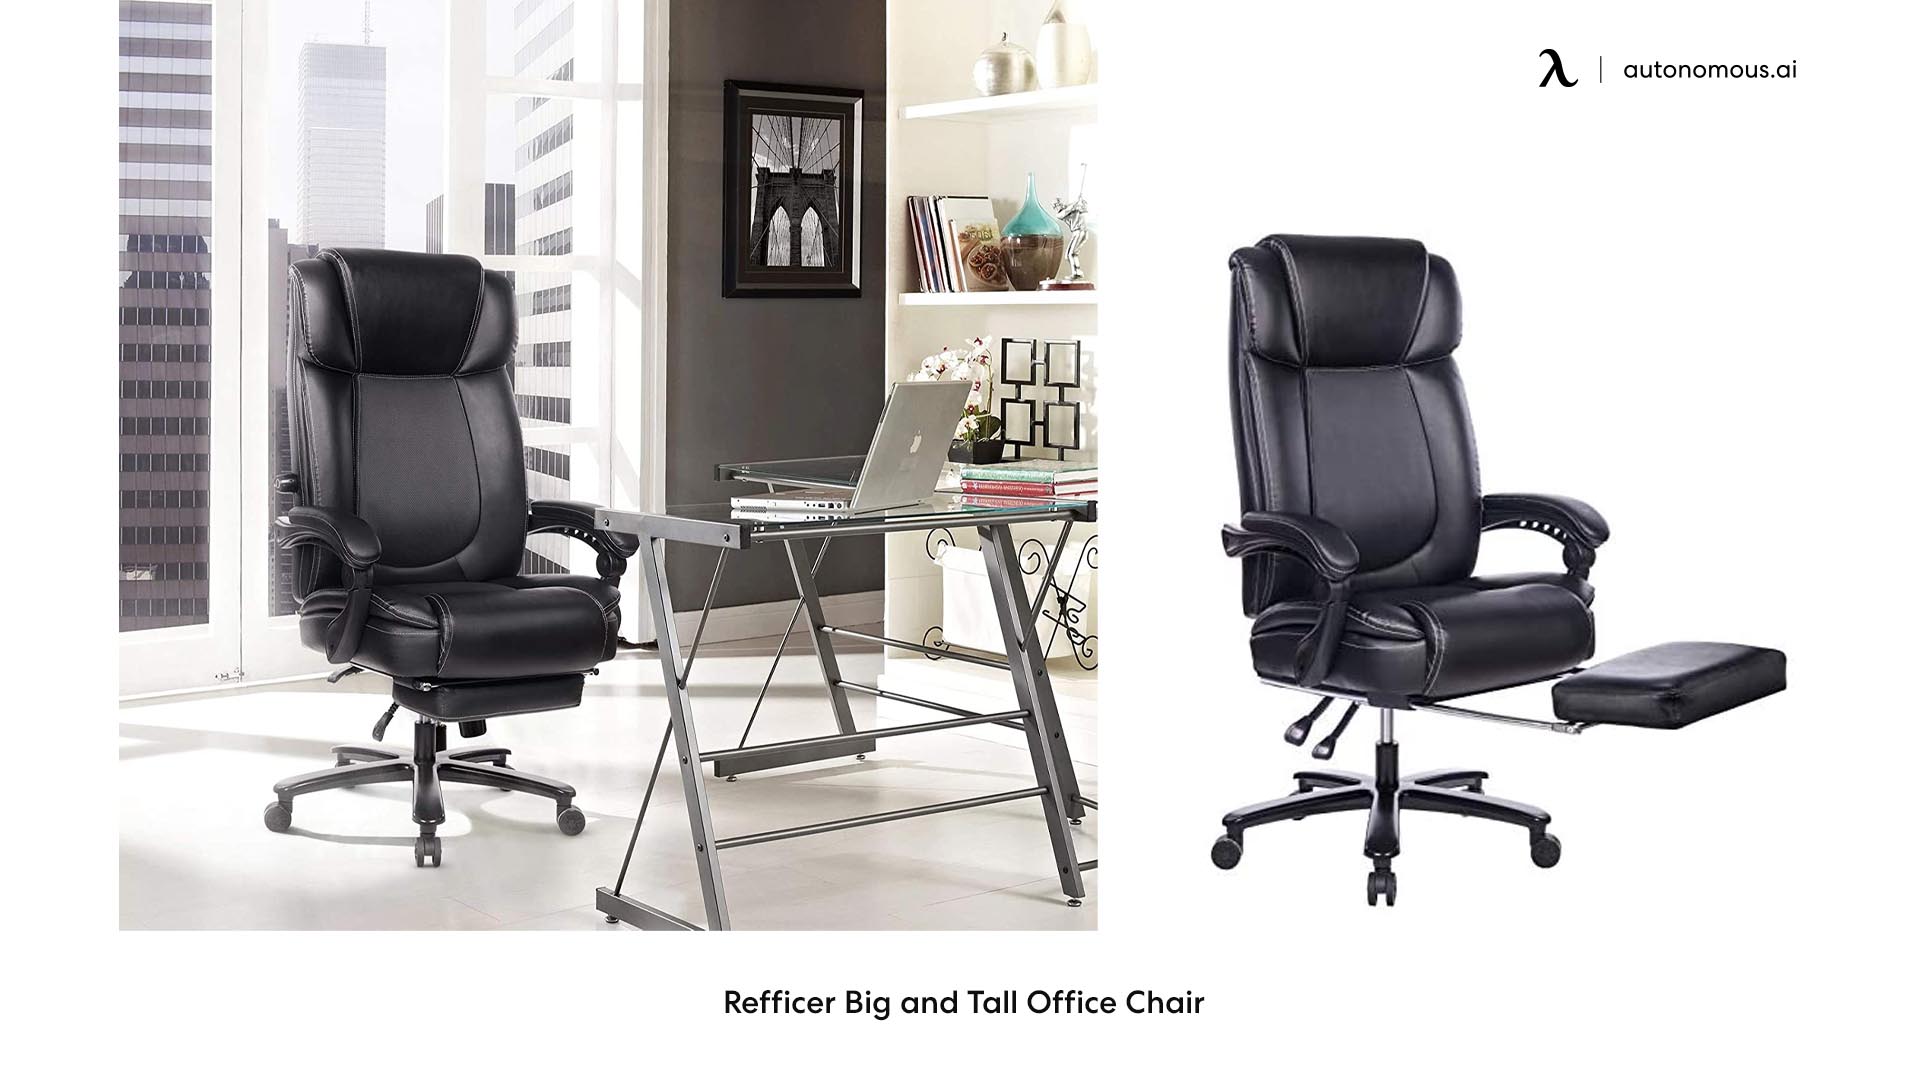 Refficer Big and Tall Office Chair